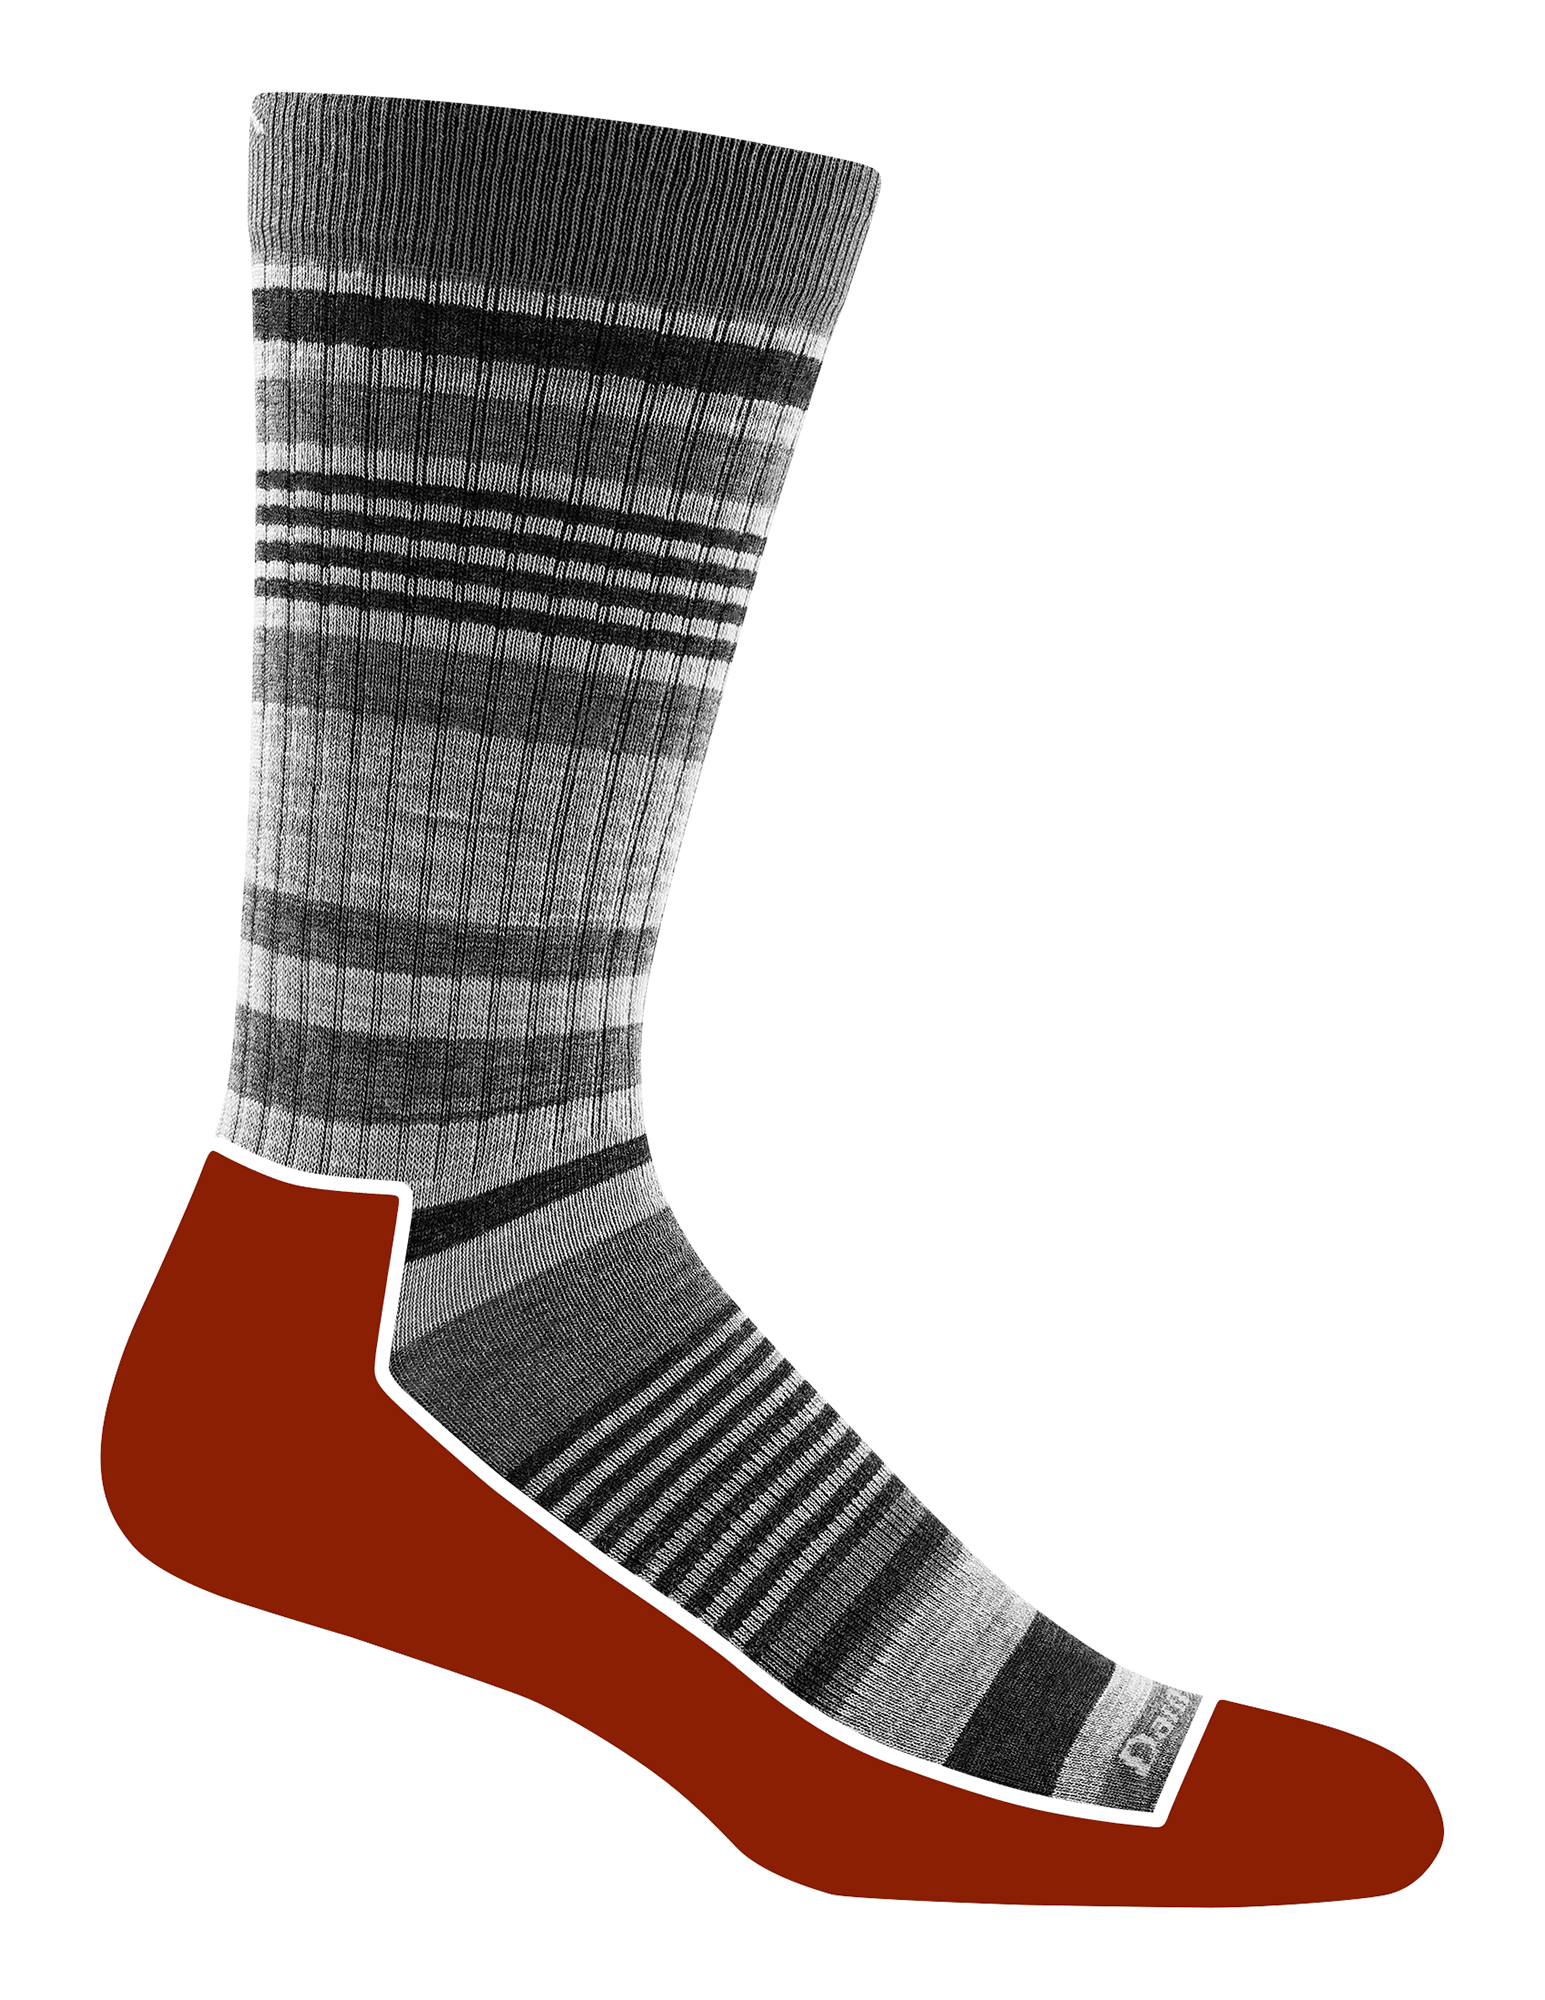 Cushion Location: With added cushion underfoot and just below the ankle, cushion Lifestyle socks …